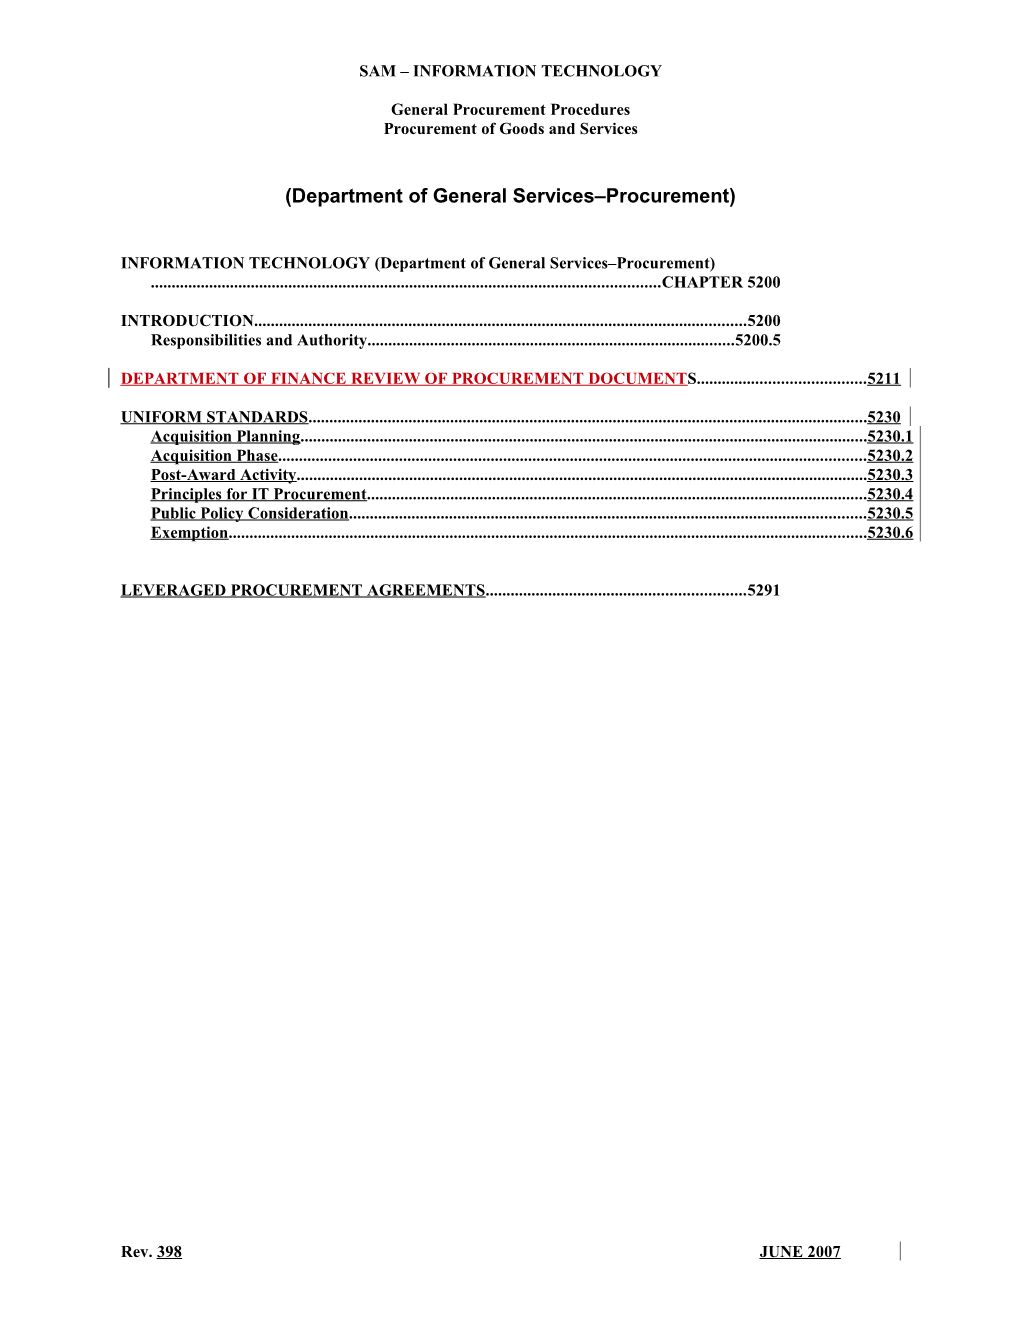 5211 Department of Finance Review of Procurement Documents